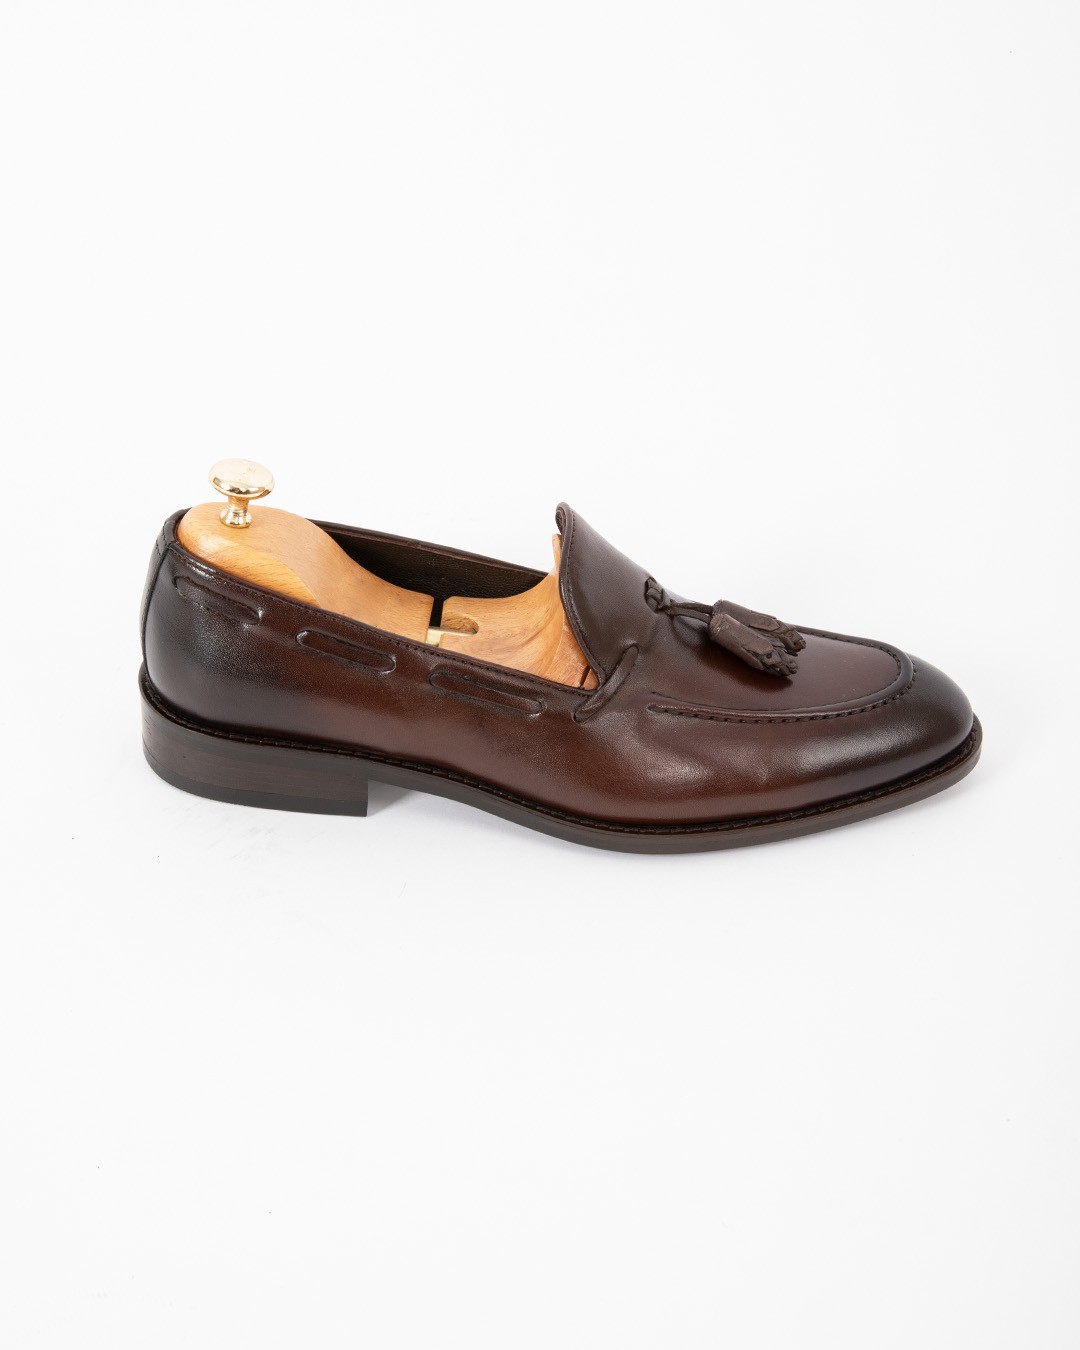 Loafer Shoes - Brown